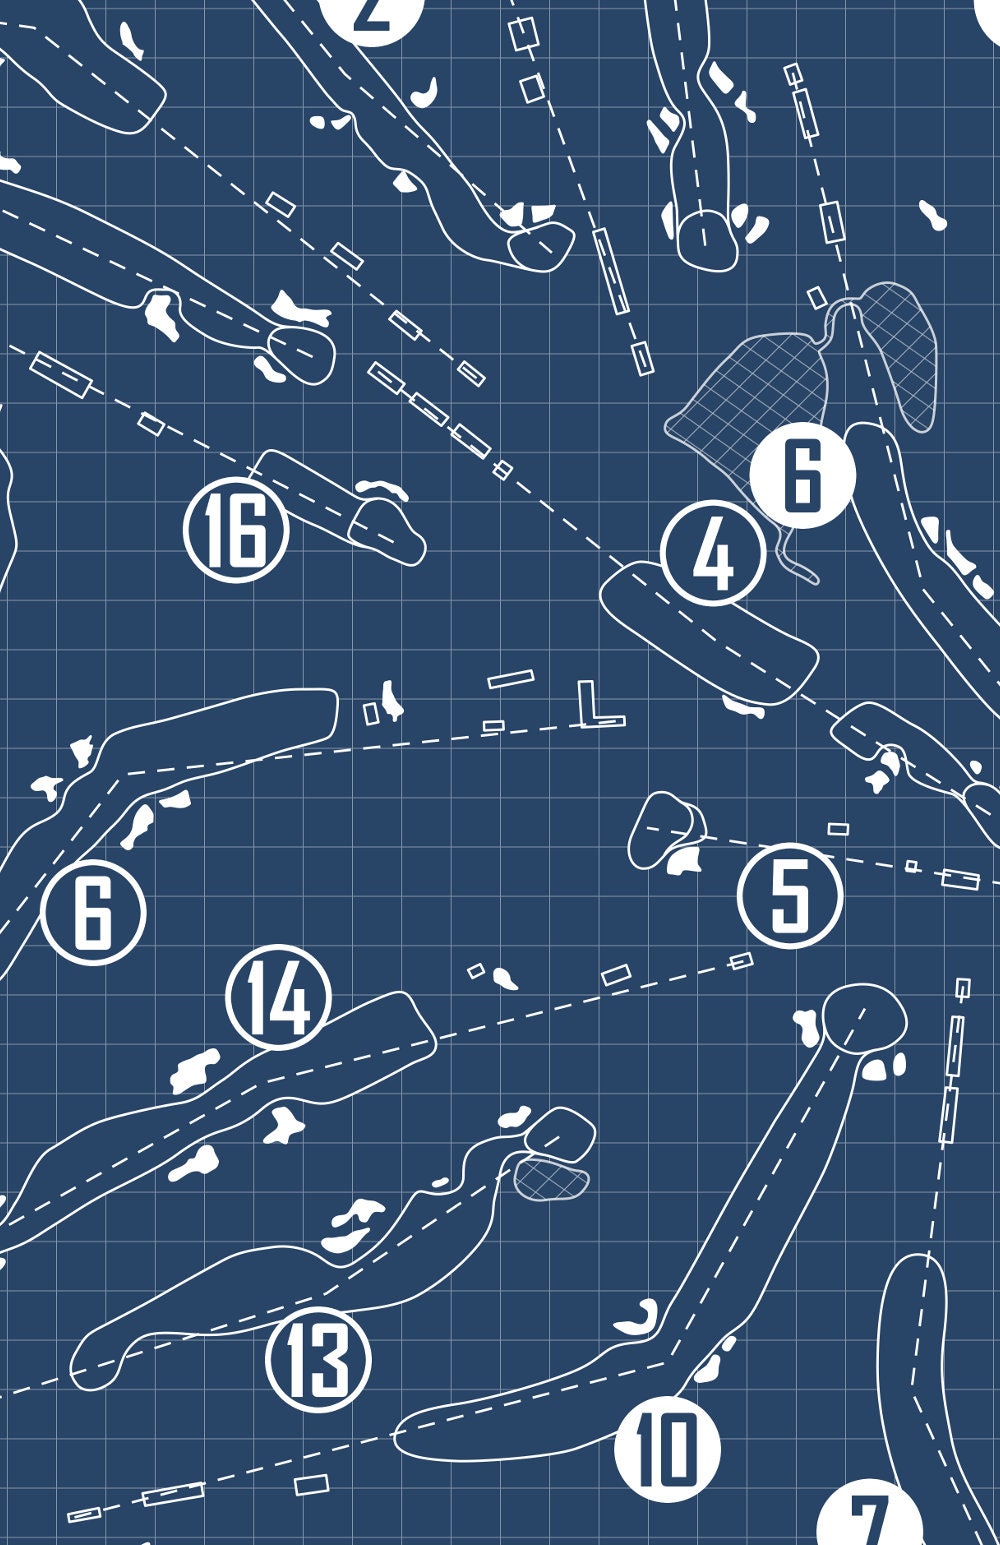 The Broadmoor East and West Courses Blueprint (Print)